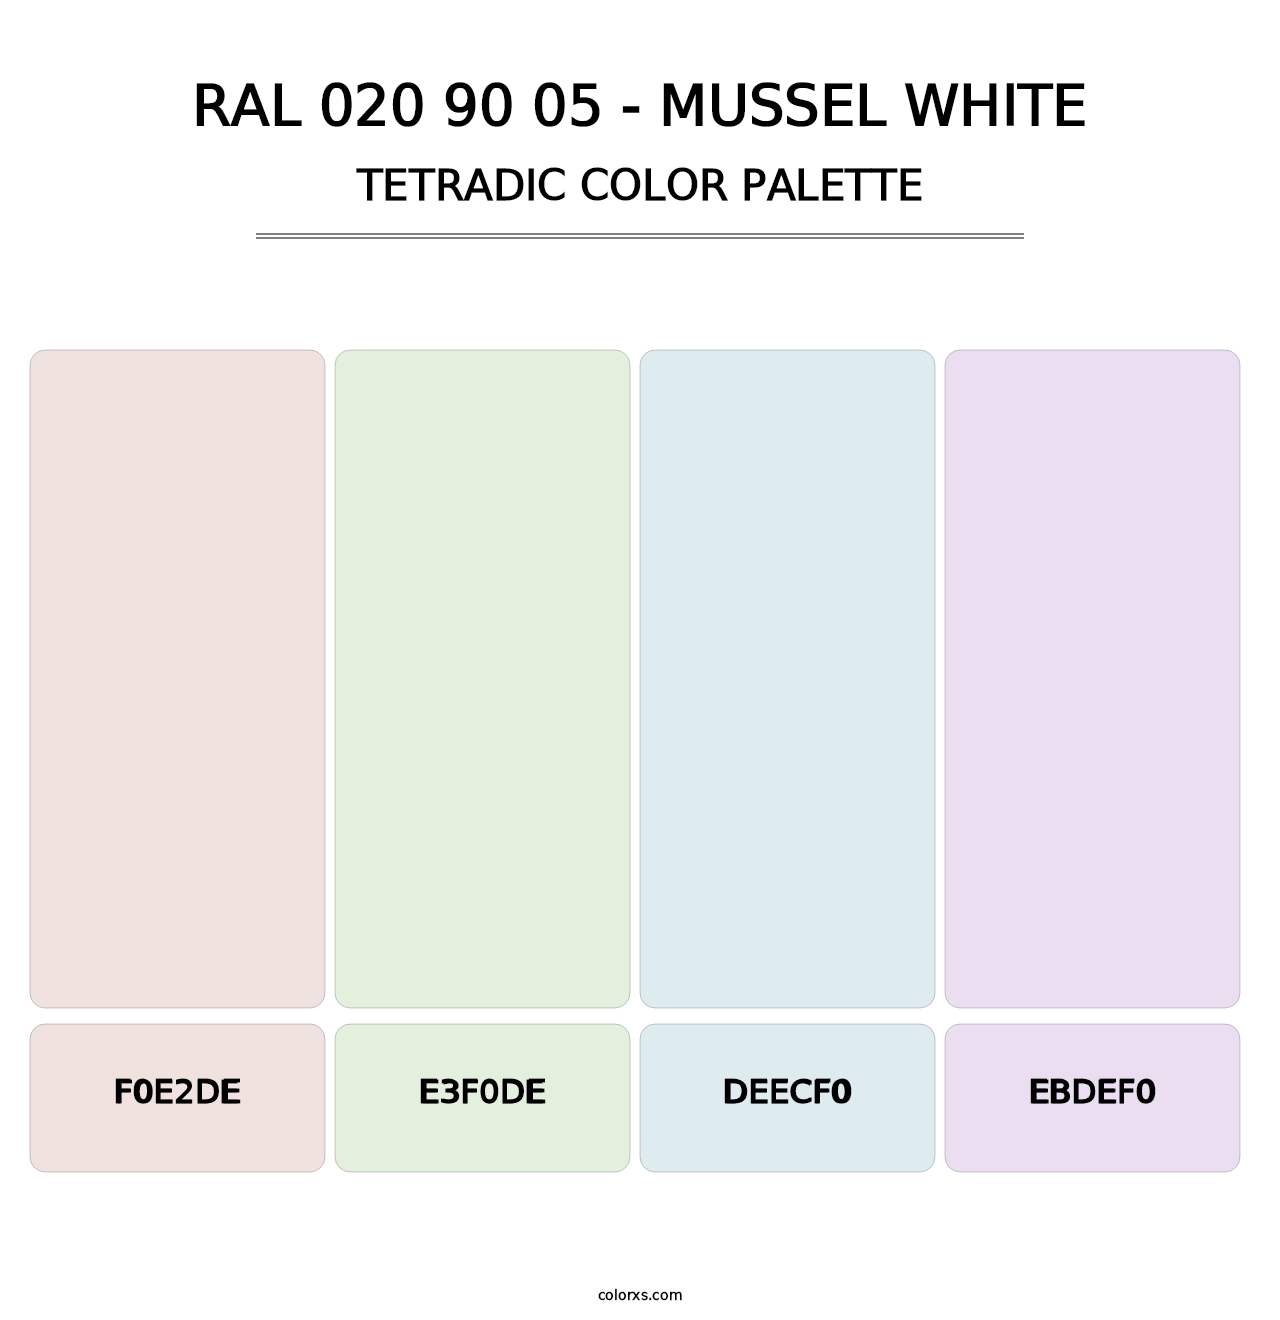 RAL 020 90 05 - Mussel White - Tetradic Color Palette